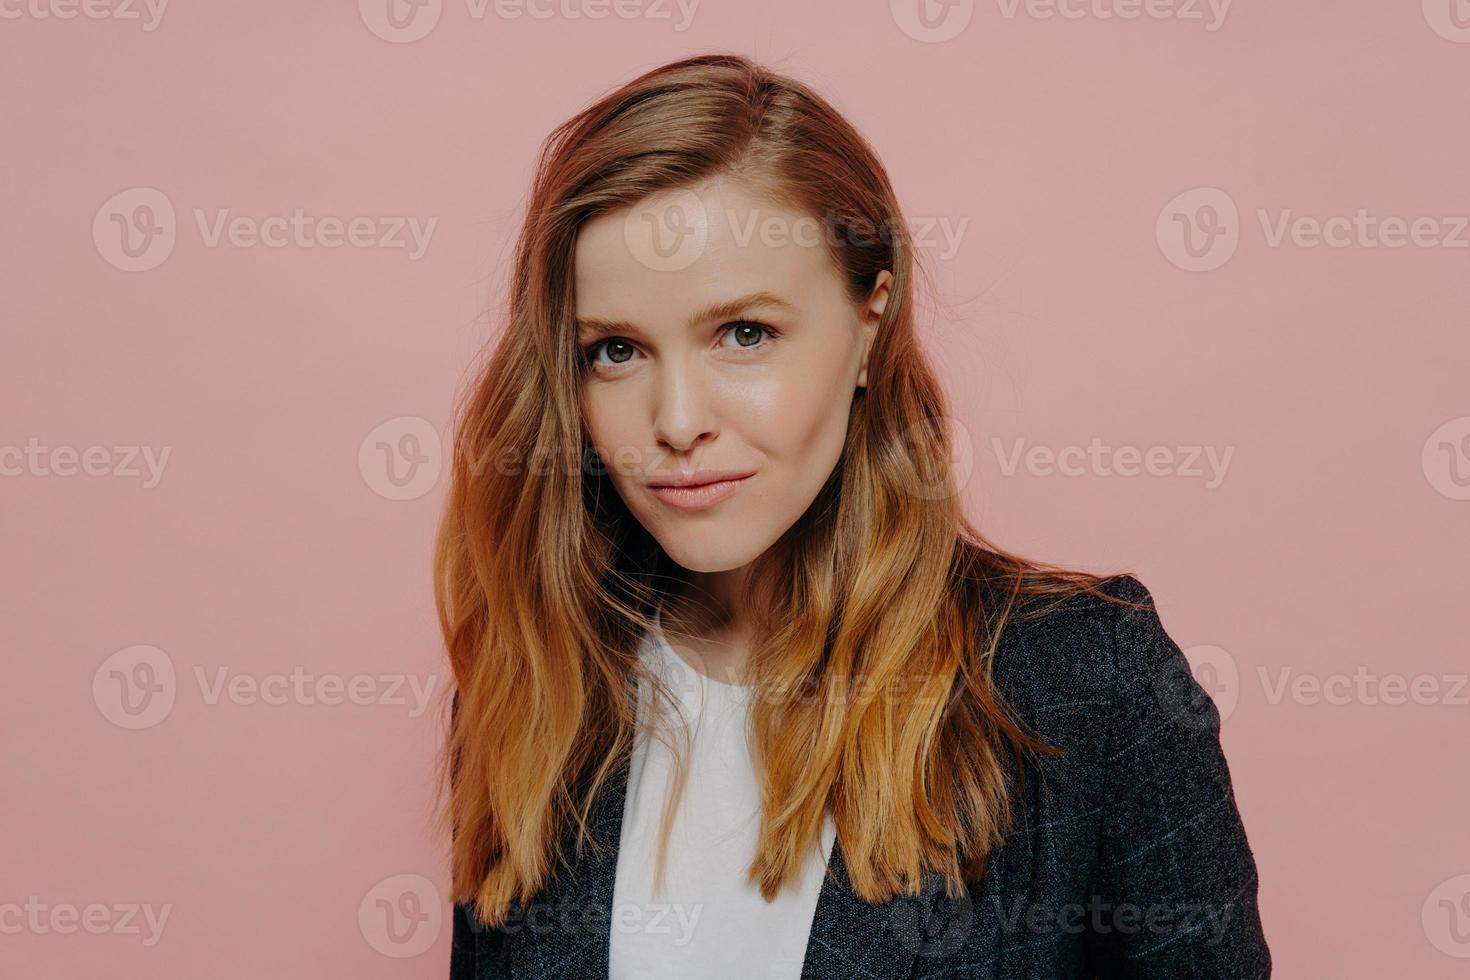 Attractive young woman with ginger hair in formal jacket posing against pink background photo